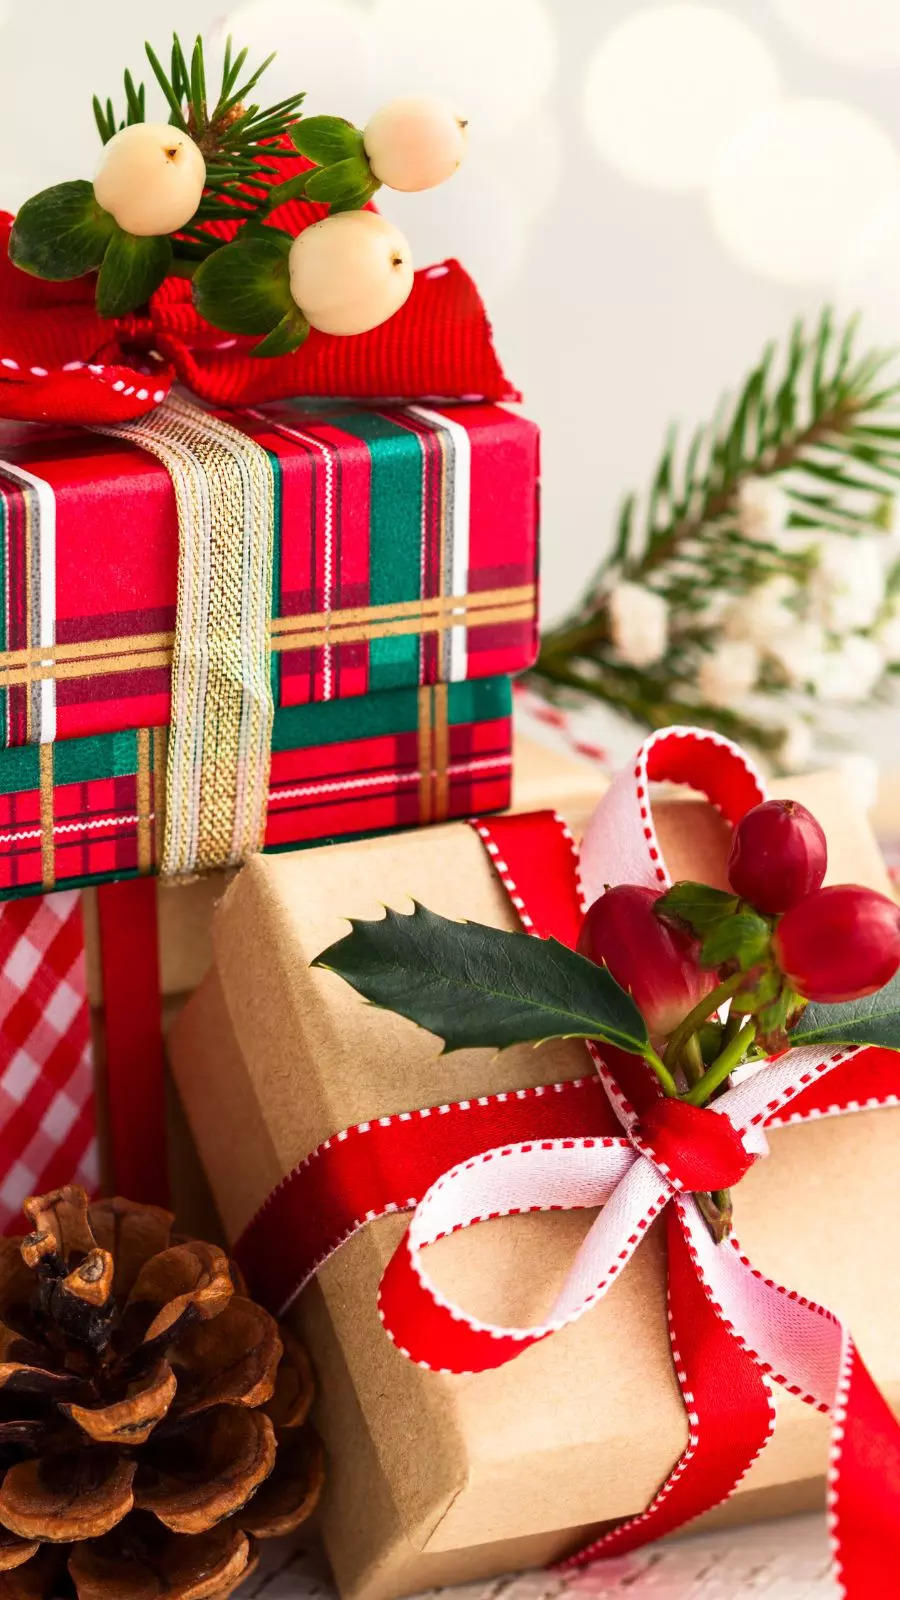 DIY Christmas Gifts: 50 Unique DIY Christmas Gifts You Can Make for Friends  and Family - Soap Deli News